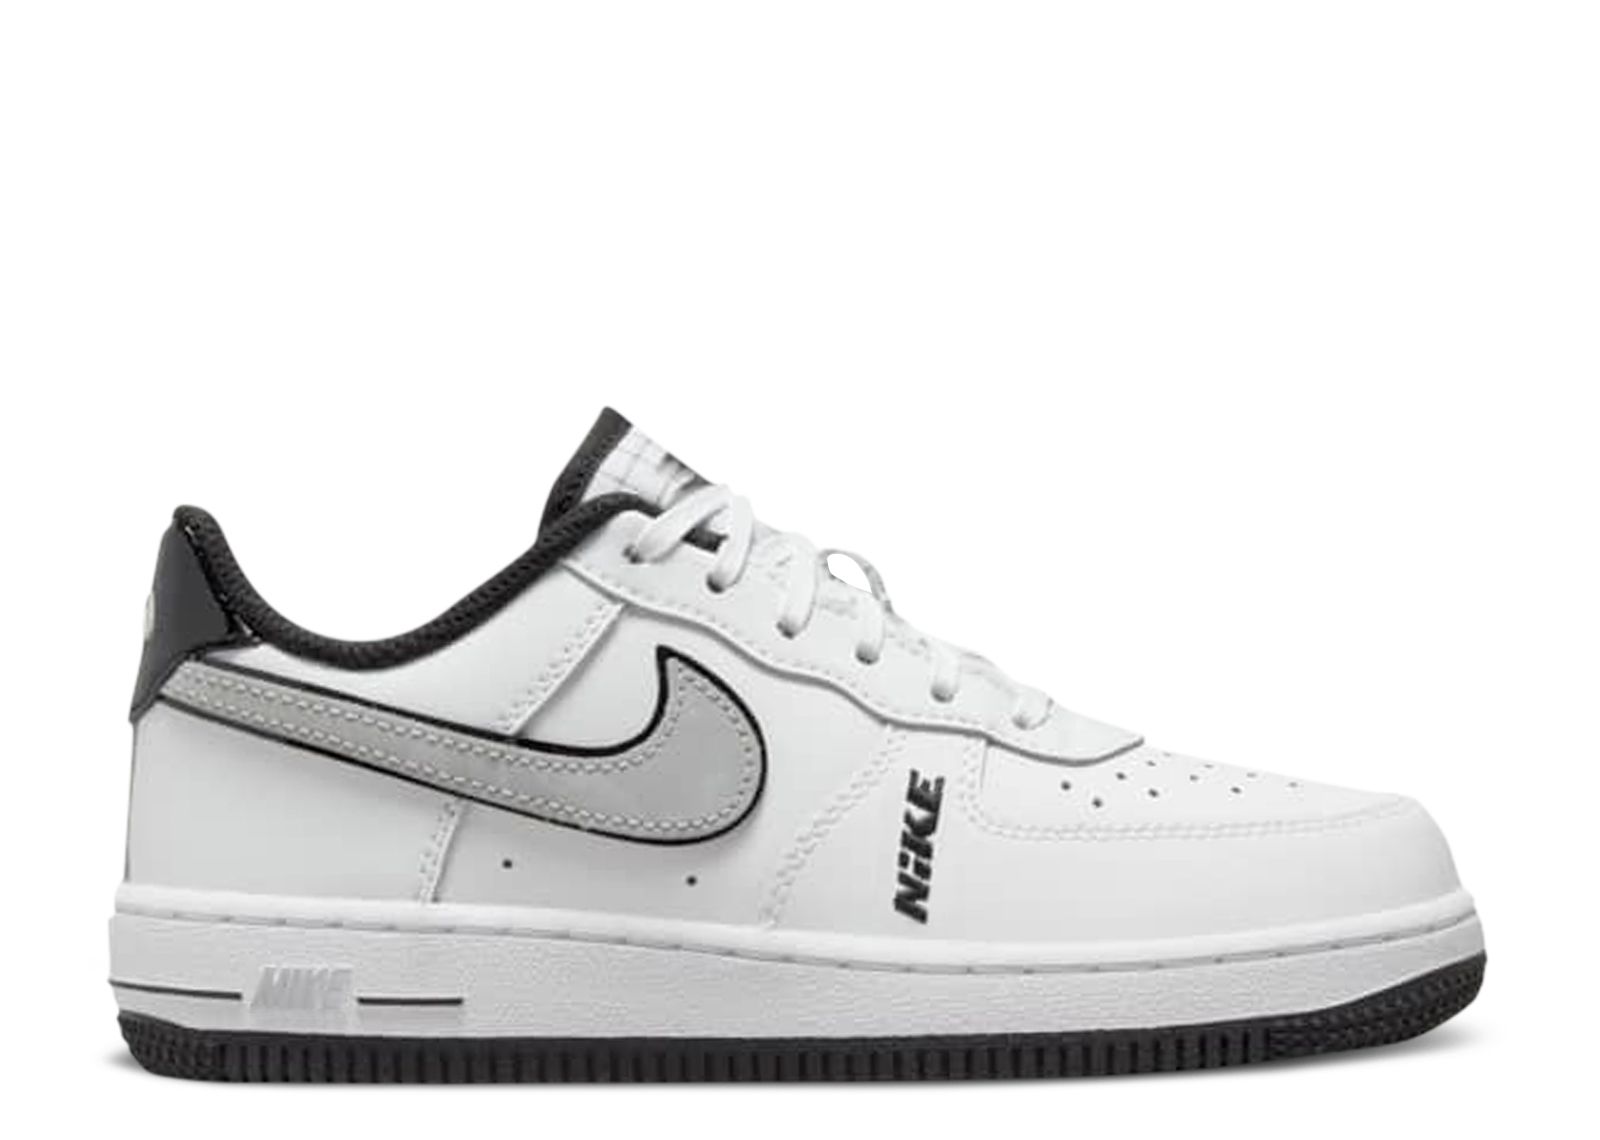 Nike Air Force 1 LV8 White/Black-Wolf Grey TD Toddler Size 2c DO3808 101  New